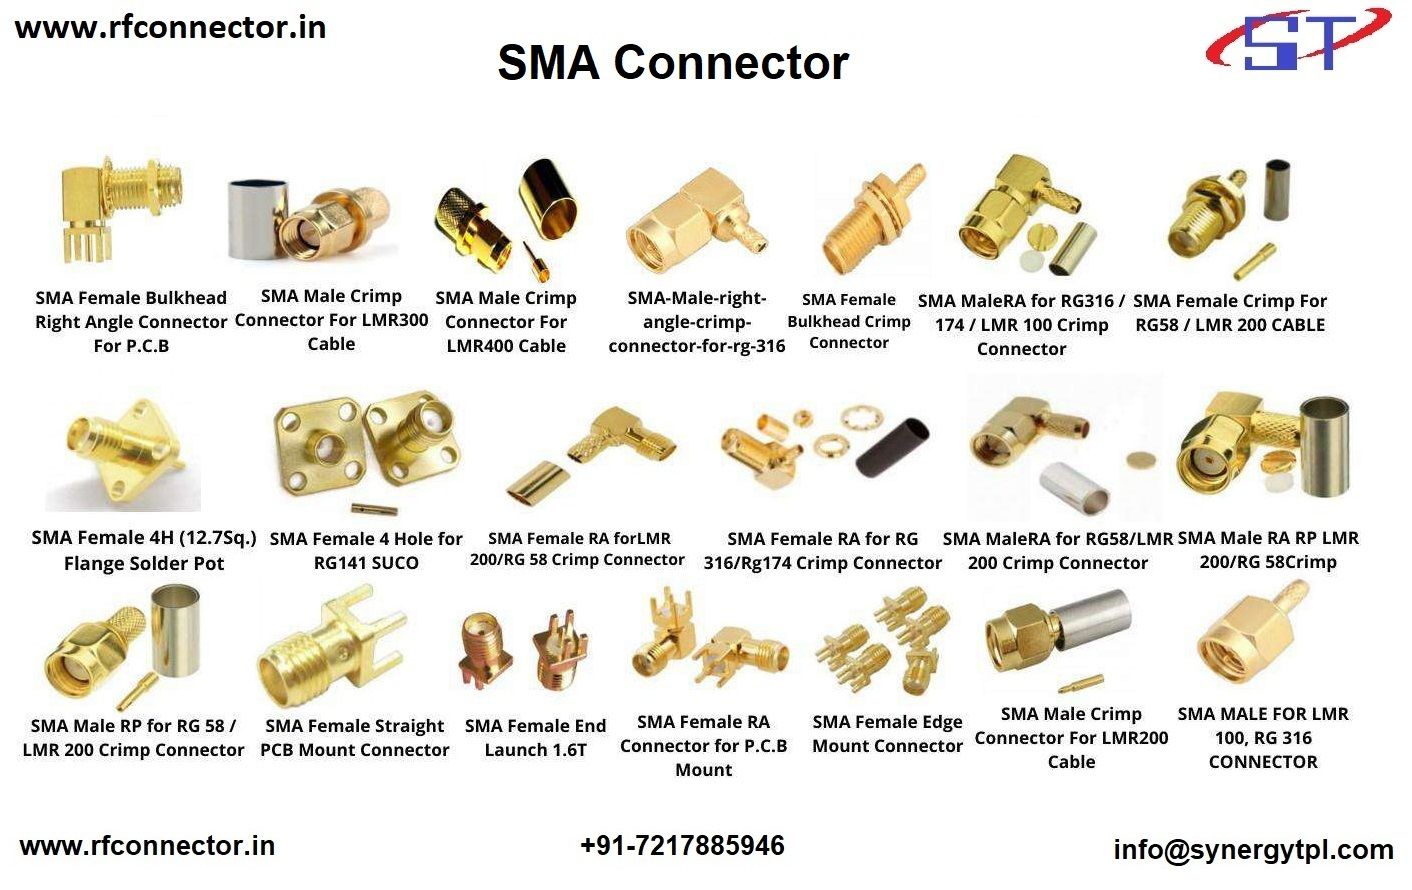 SMB male right angle crimp connector for BT 3002 cable